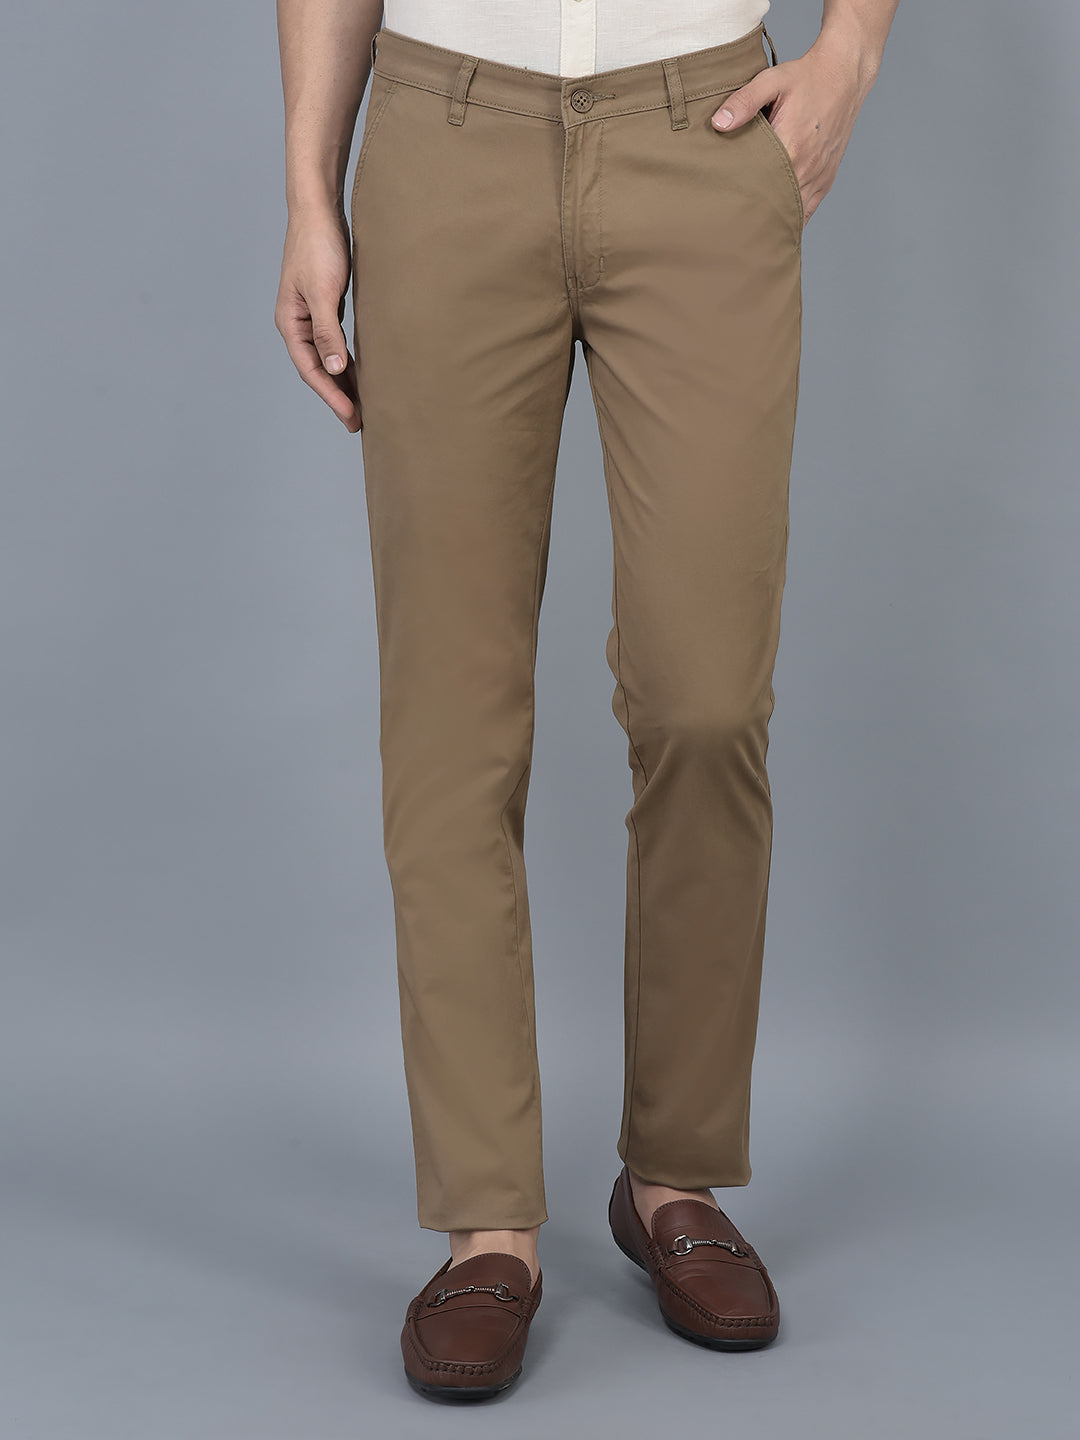 Elevate Your Style with Cobb Khaki Slim Fit Chinos  Shop Now